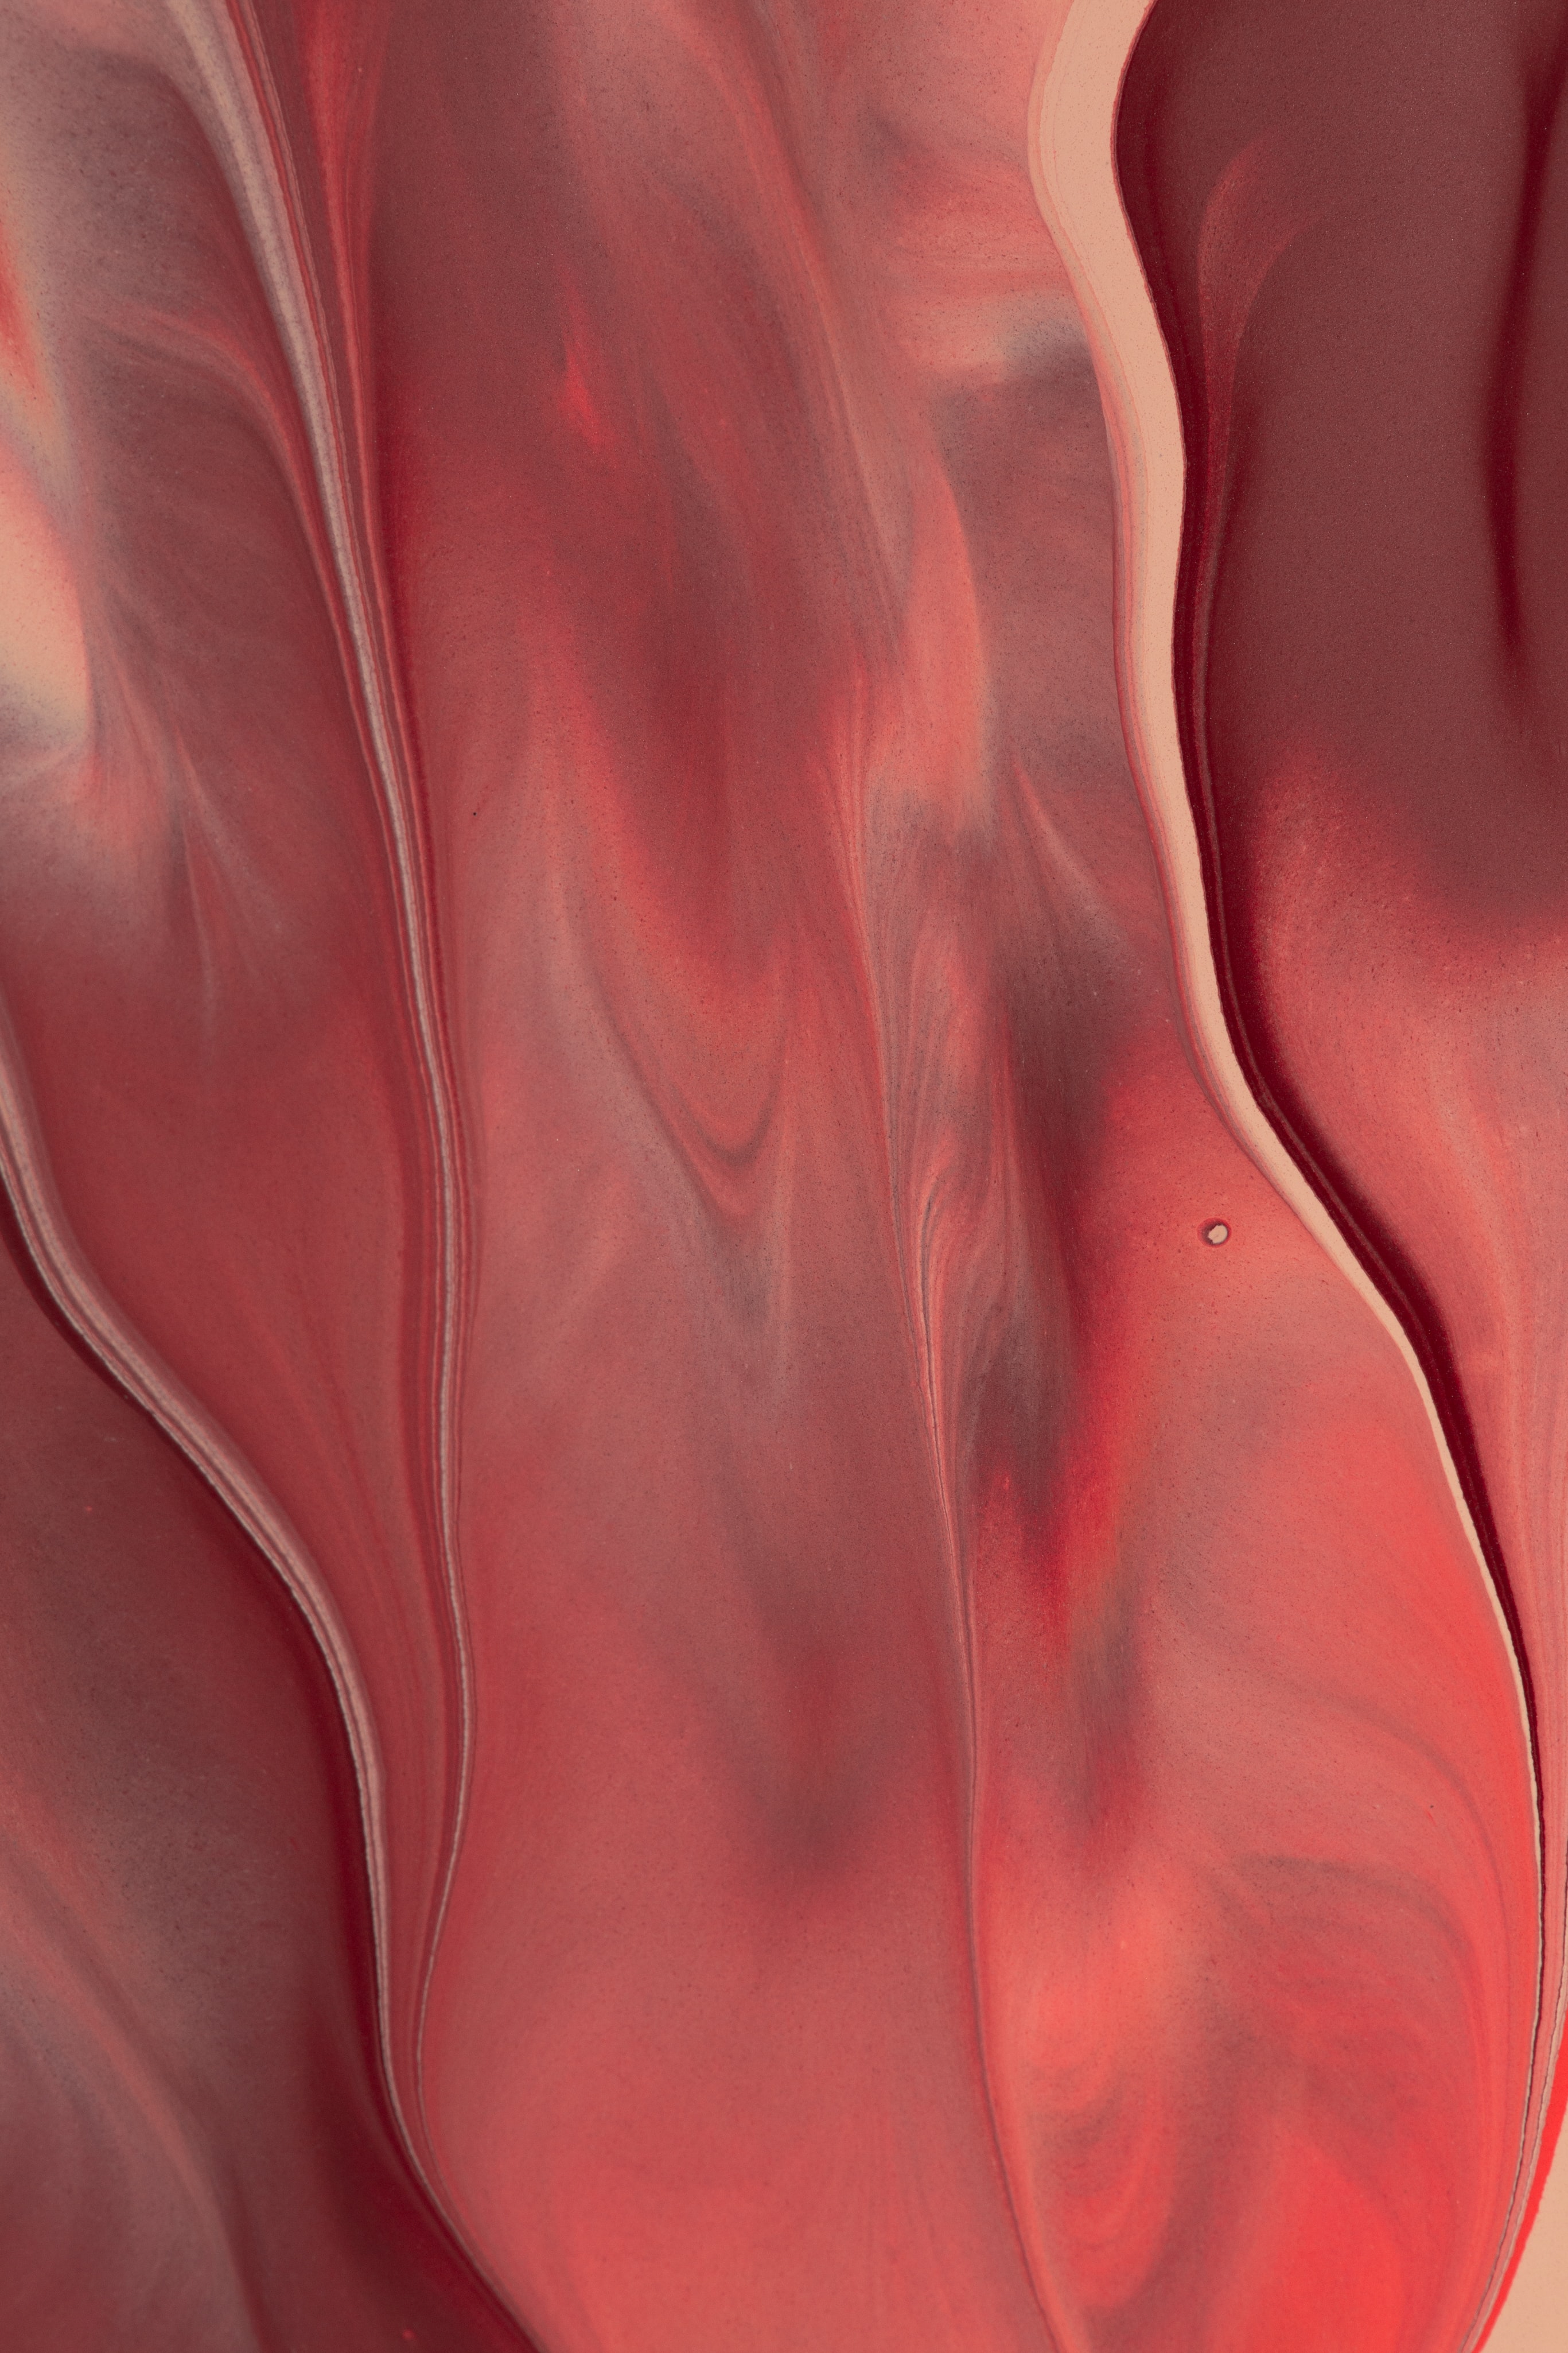 paint, red, liquid, abstract, divorces HD wallpaper